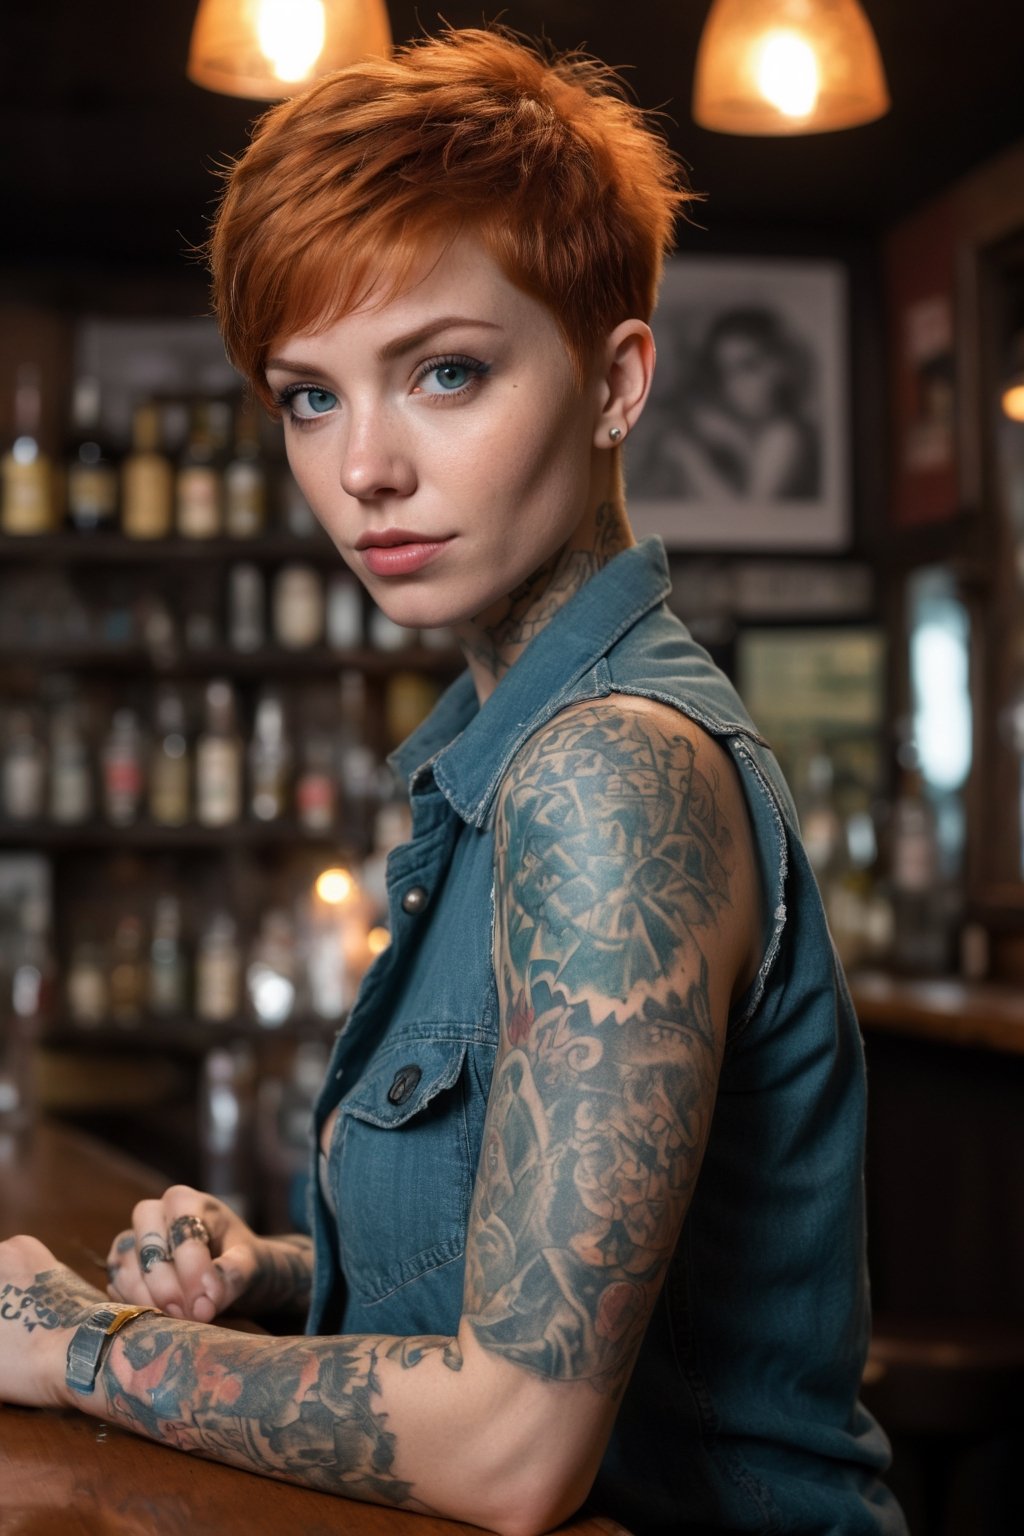 Professional, focus, 50mm photograph,8k, highly detailed, studio quality, DSLR photo, sharp, ginger pixie cut, flannel shirt and torn jeans, tattooed arms, dark aquamarine eyes, leaning back against a bar at the local tavern 